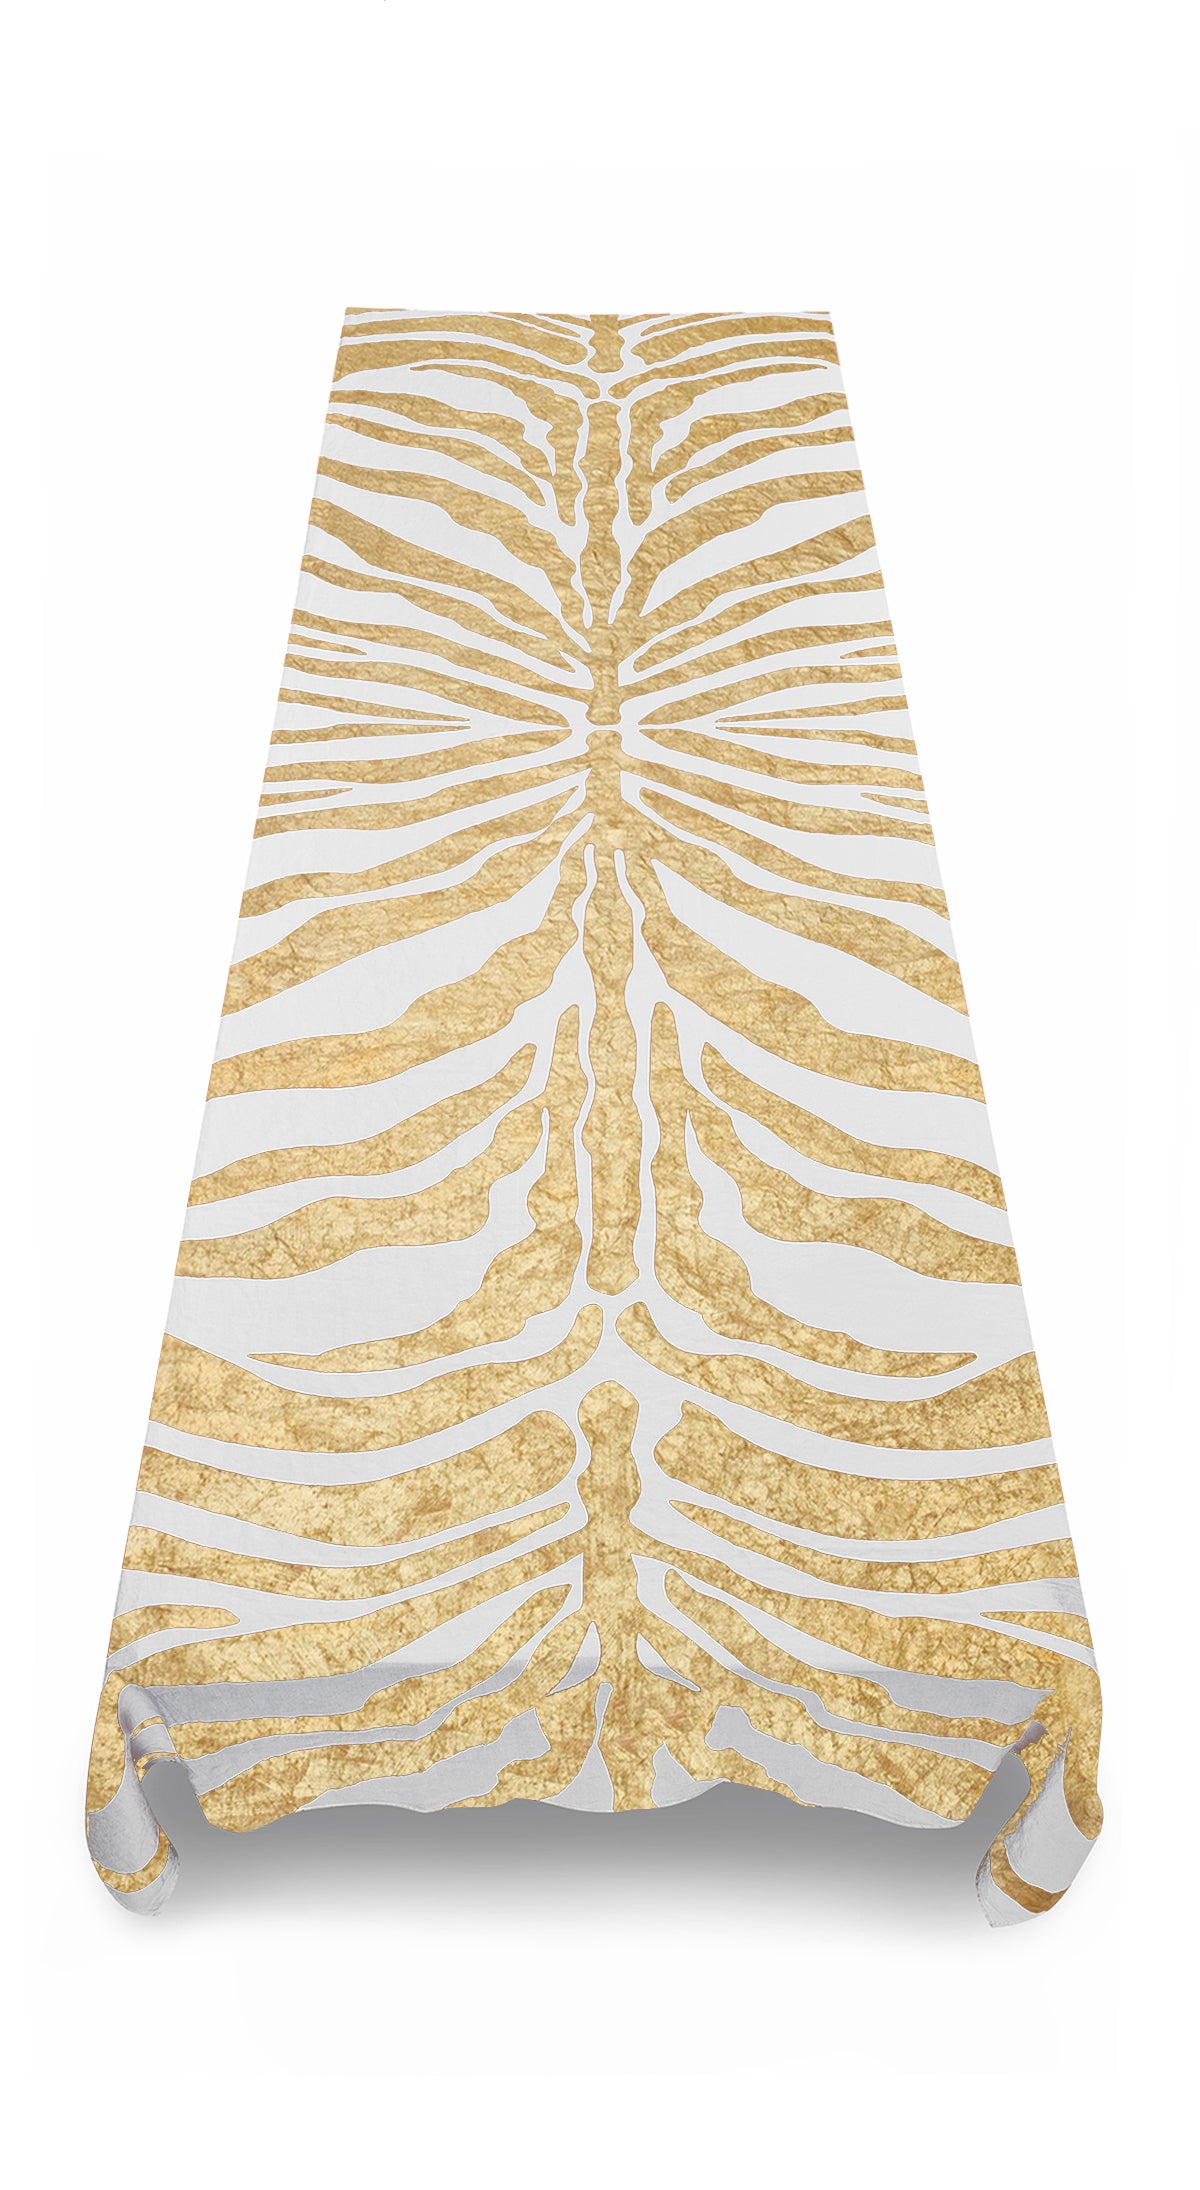 Hand Painted Zebra Linen Tablecloth in Gold